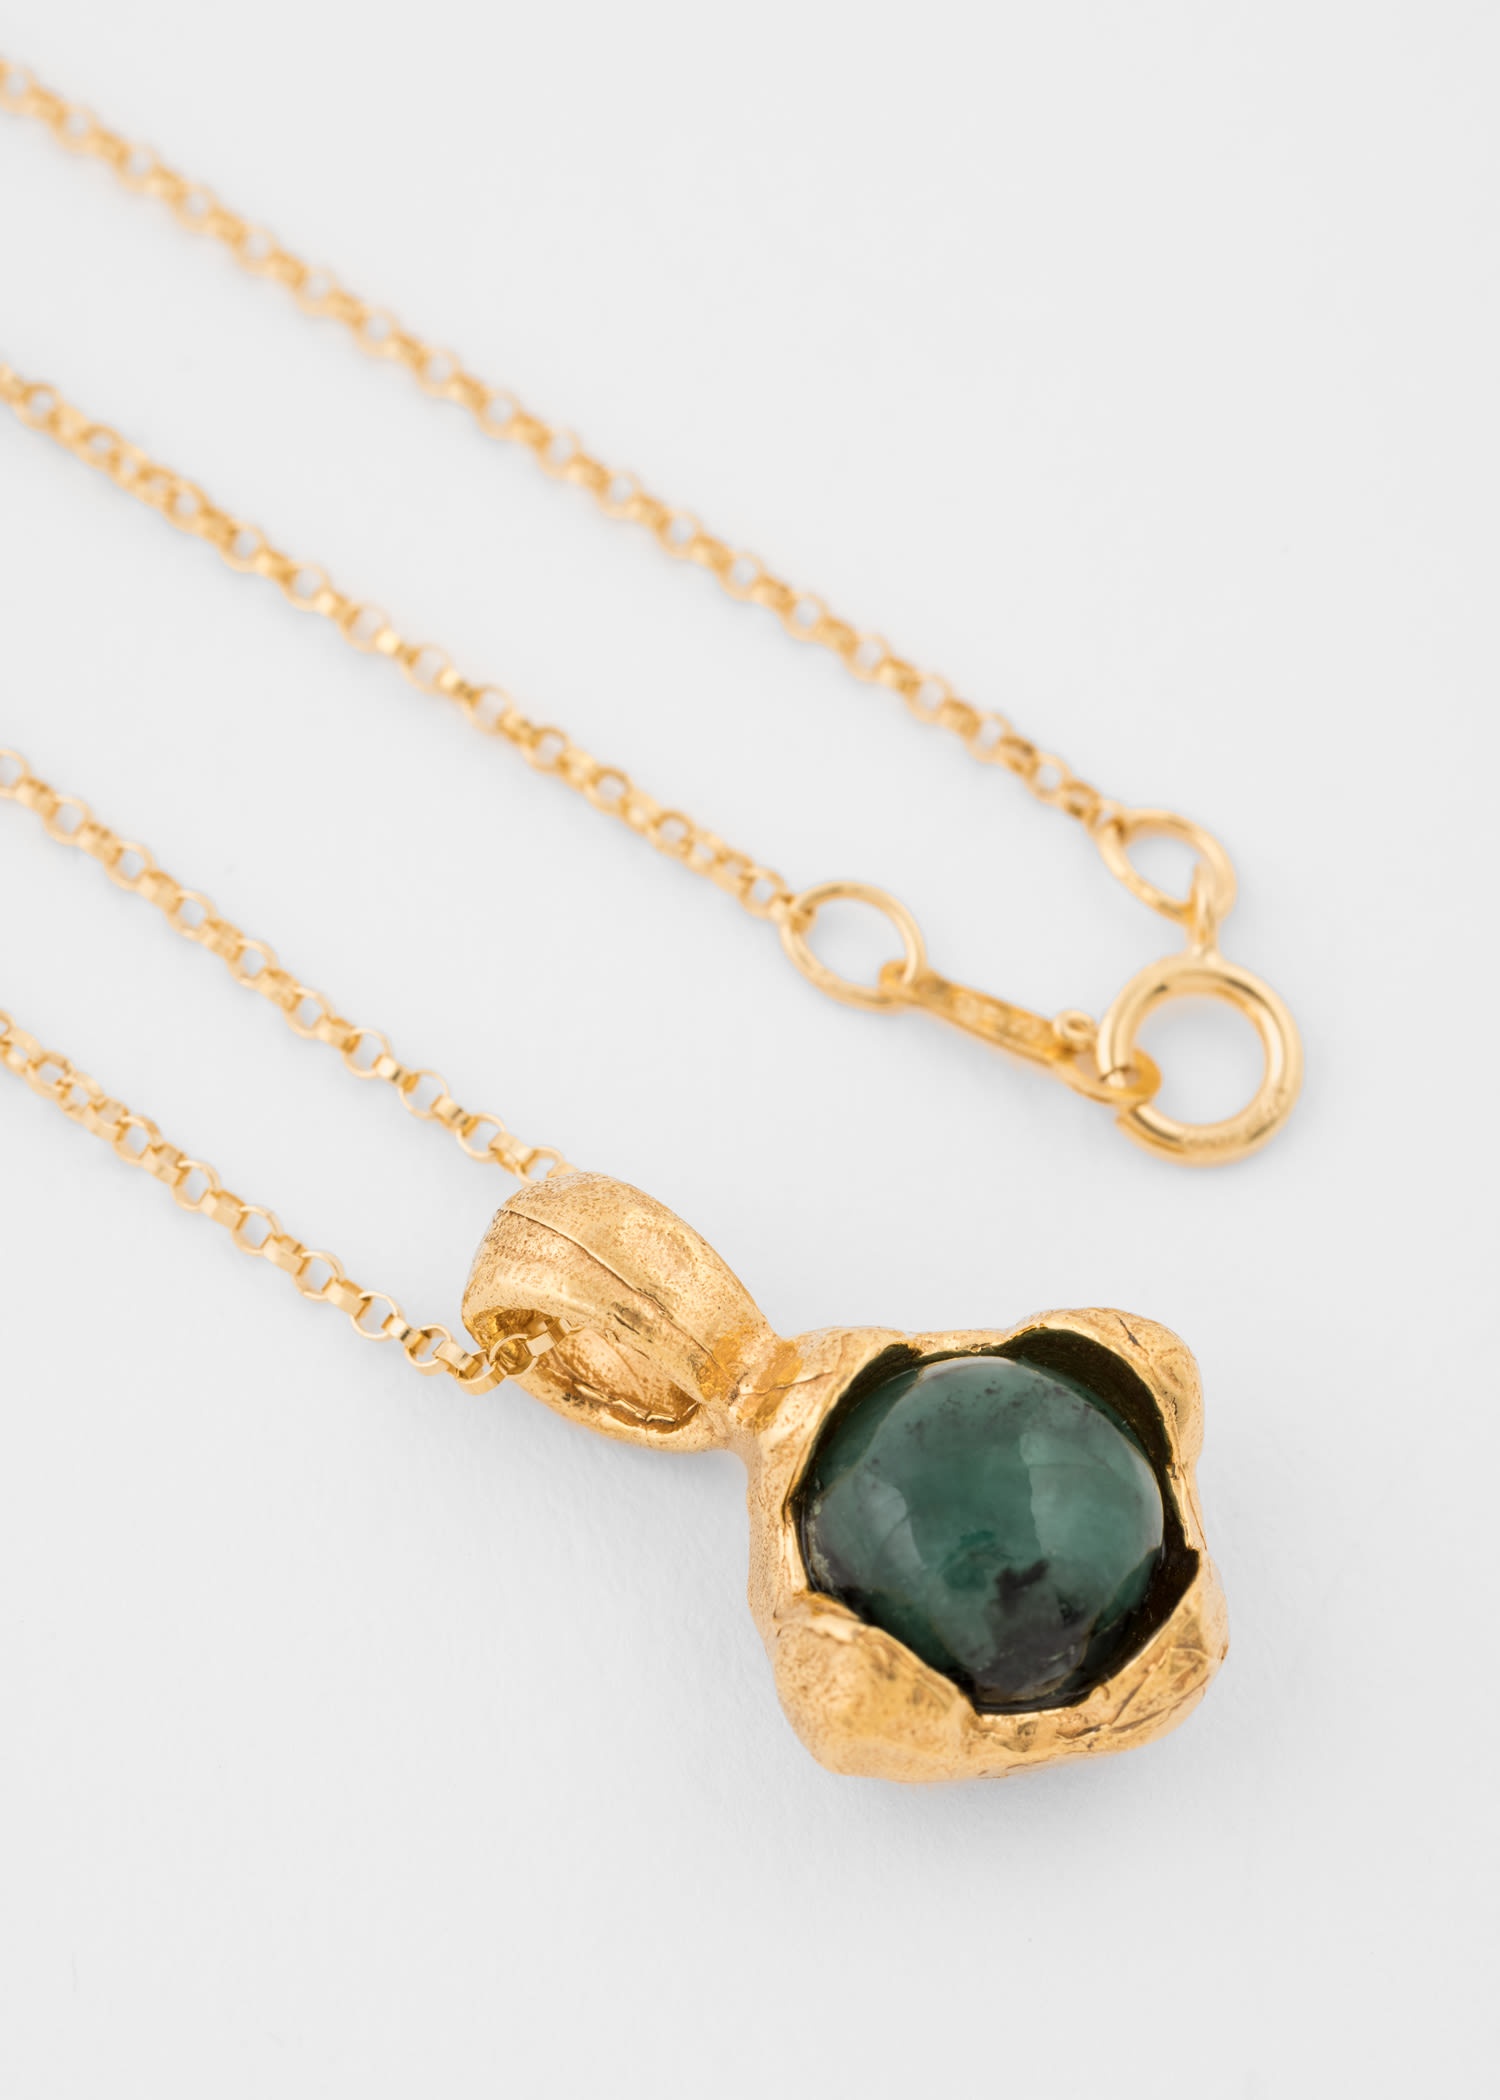 'The Eye of the Storm' Emerald Necklace by Alighieri - 3